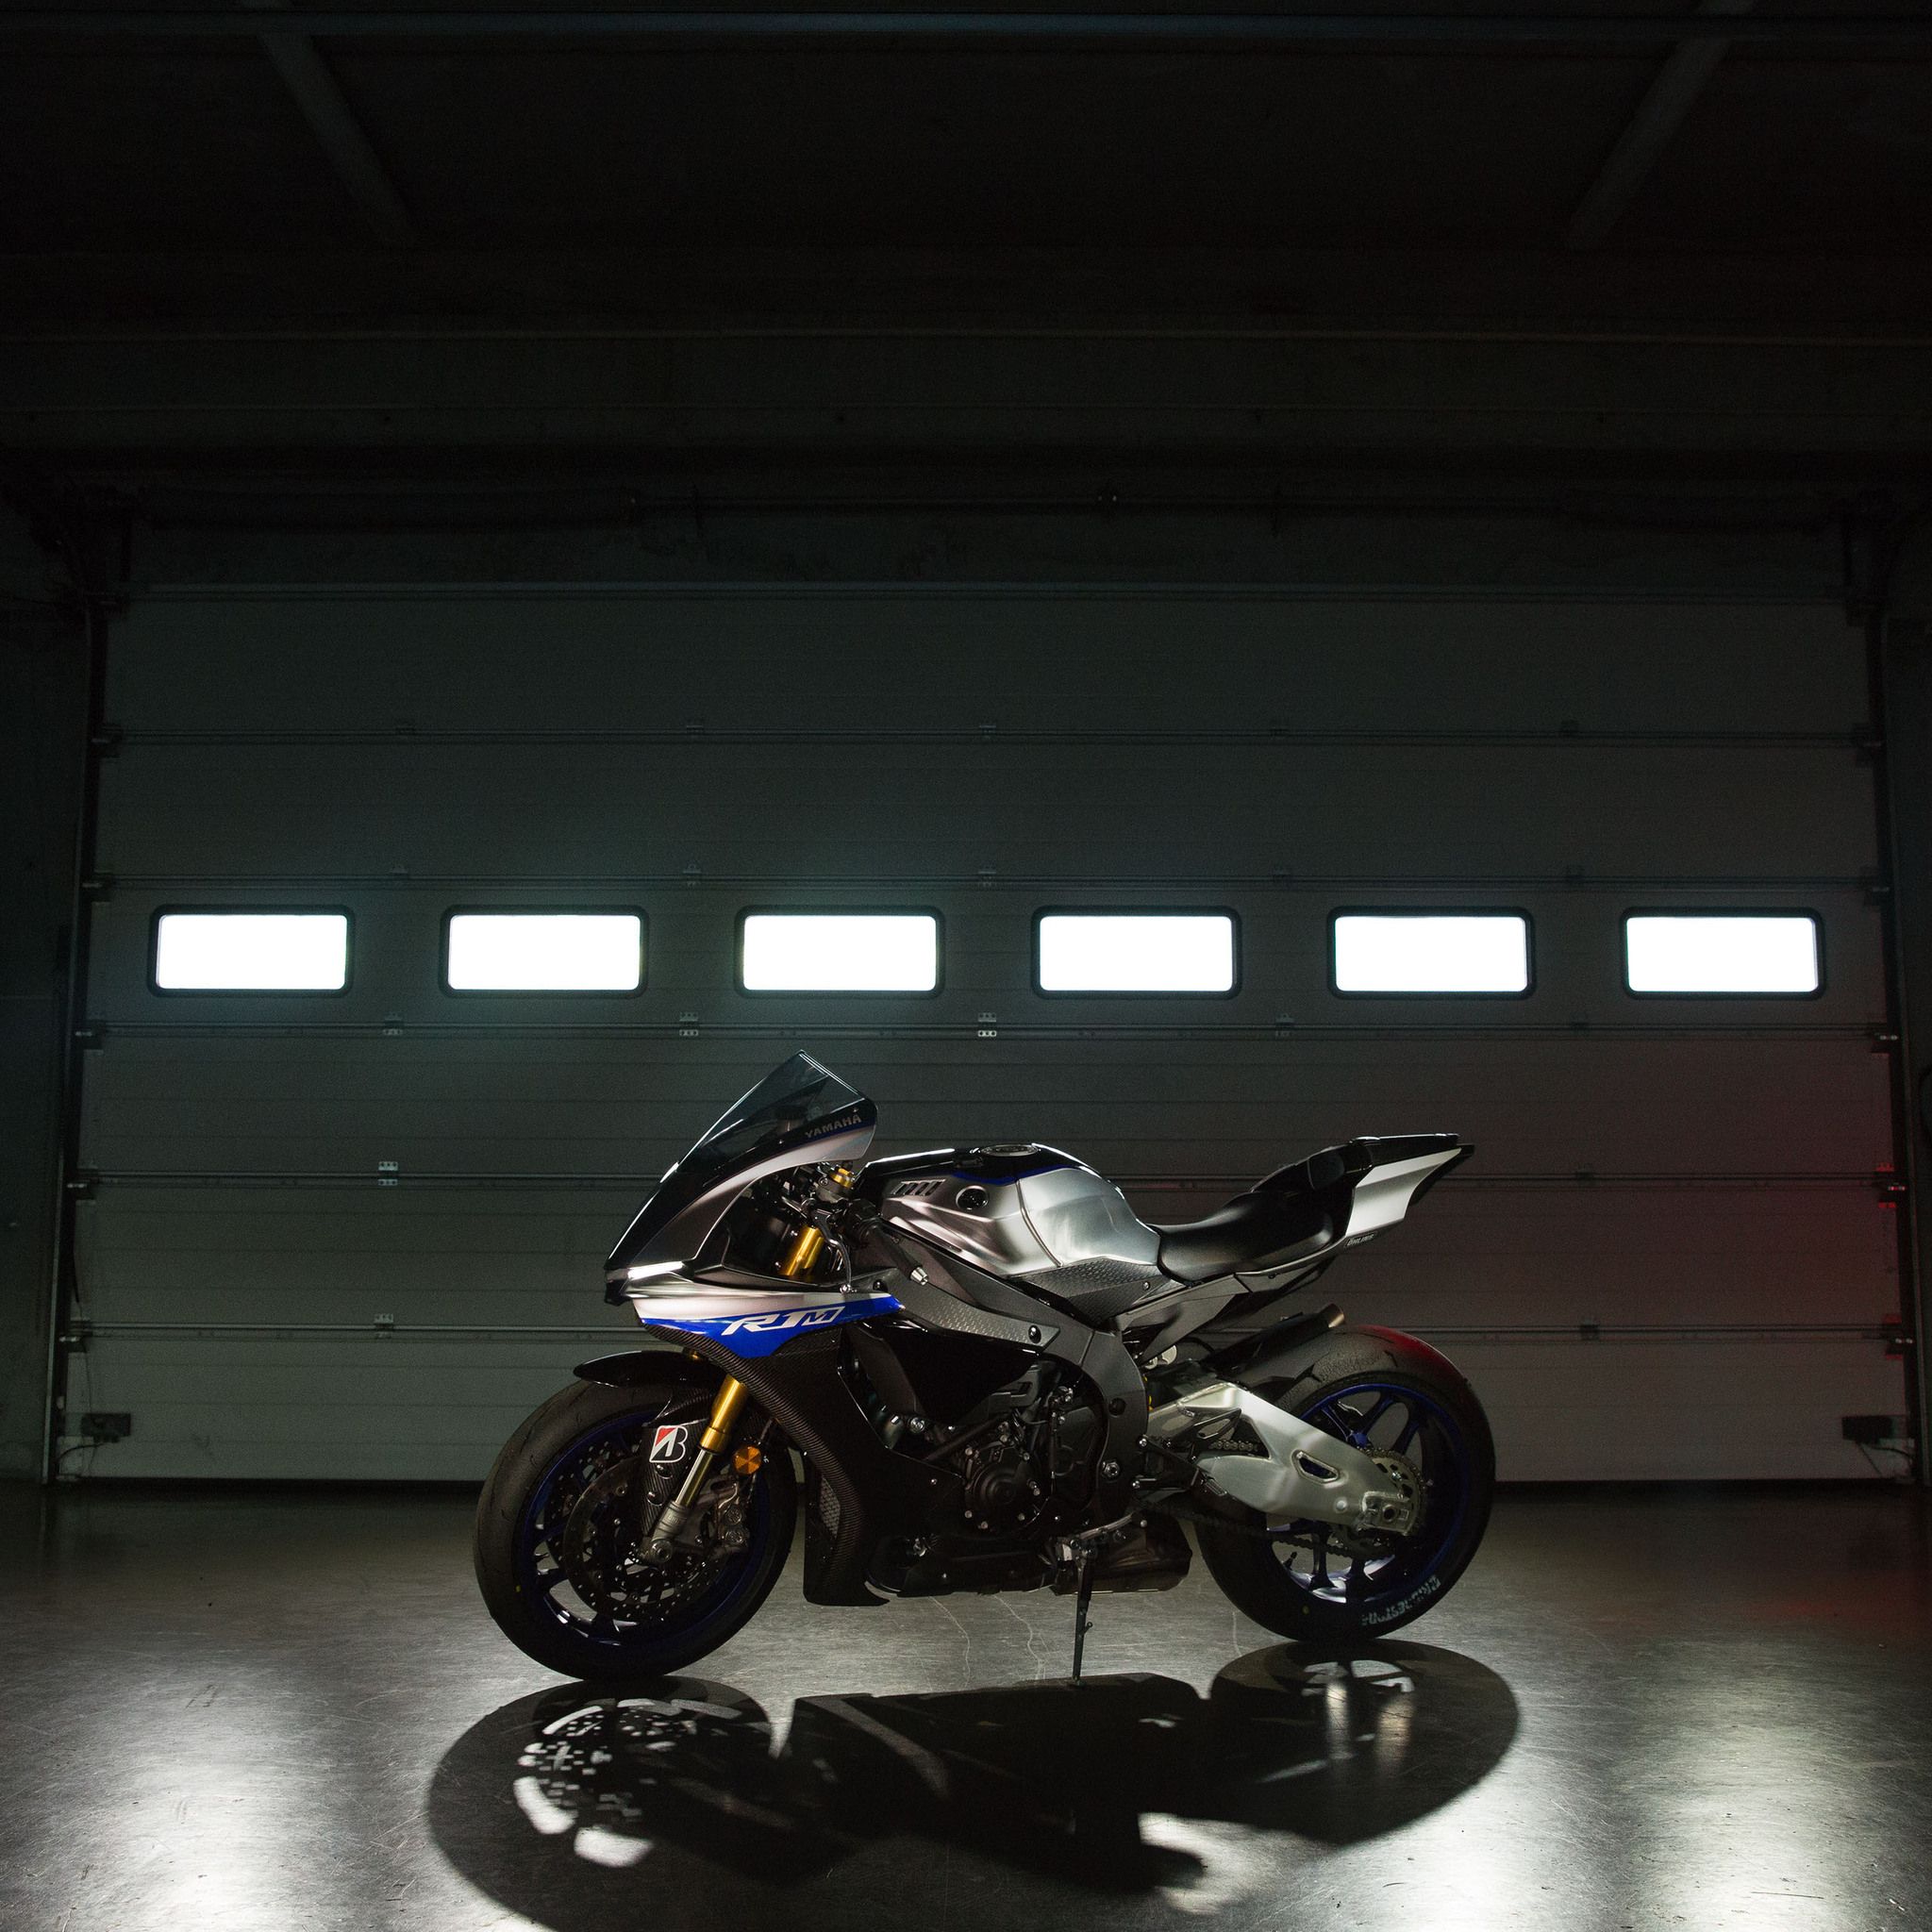 Yamaha R1 M iPad Air HD 4k Wallpaper, Image, Background, Photo and Picture